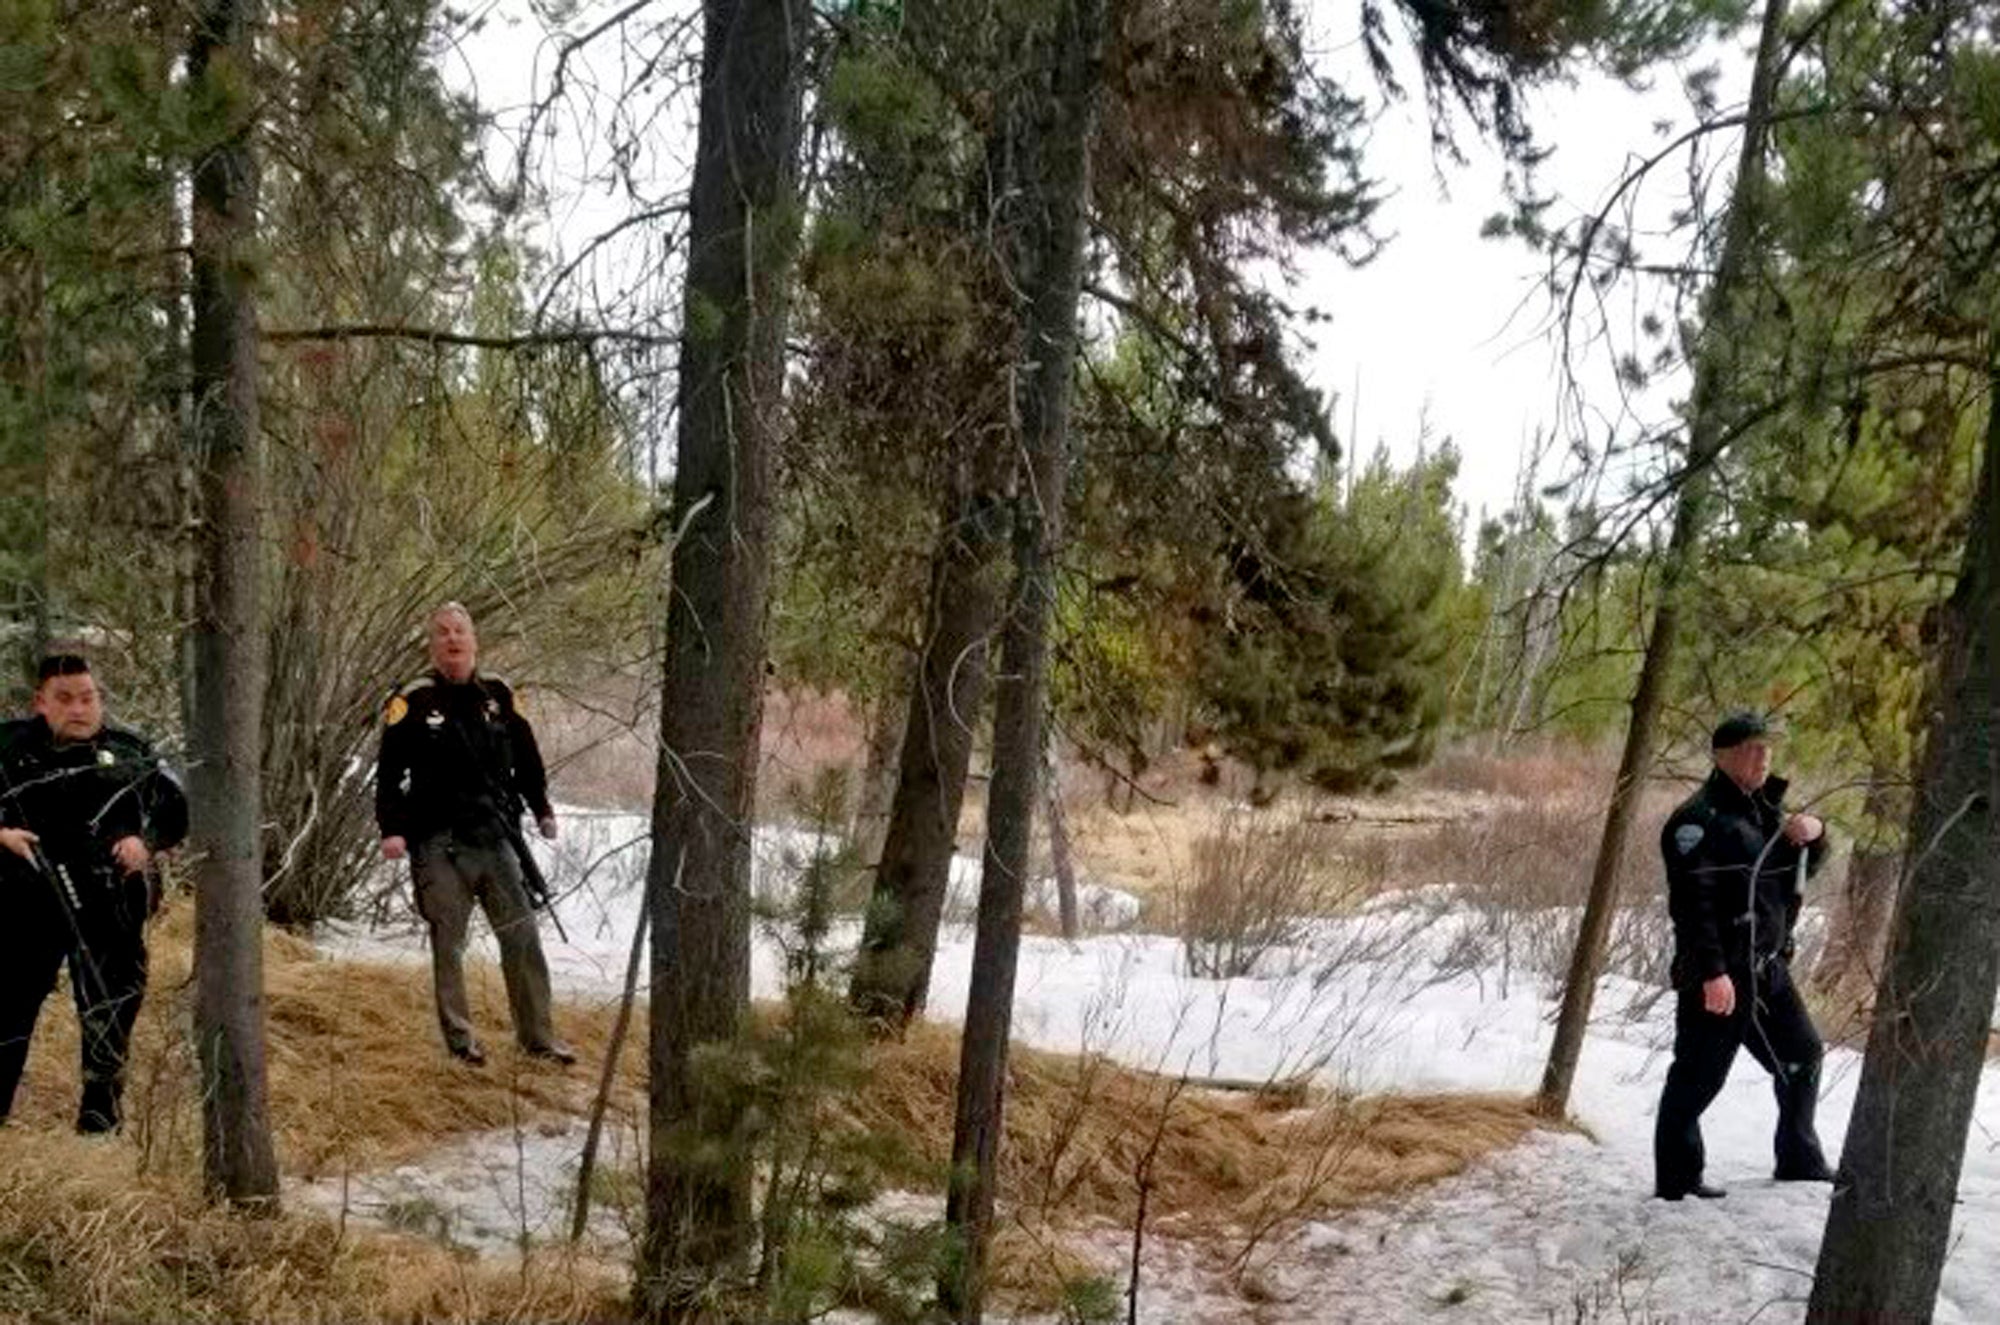 Police officers are seen near the site of a grizzly bear mauling just outside Yellowstone National Park in Montana. Authorities said Charles "Carl" Mock died on Saturday of injuries sustained in the attack